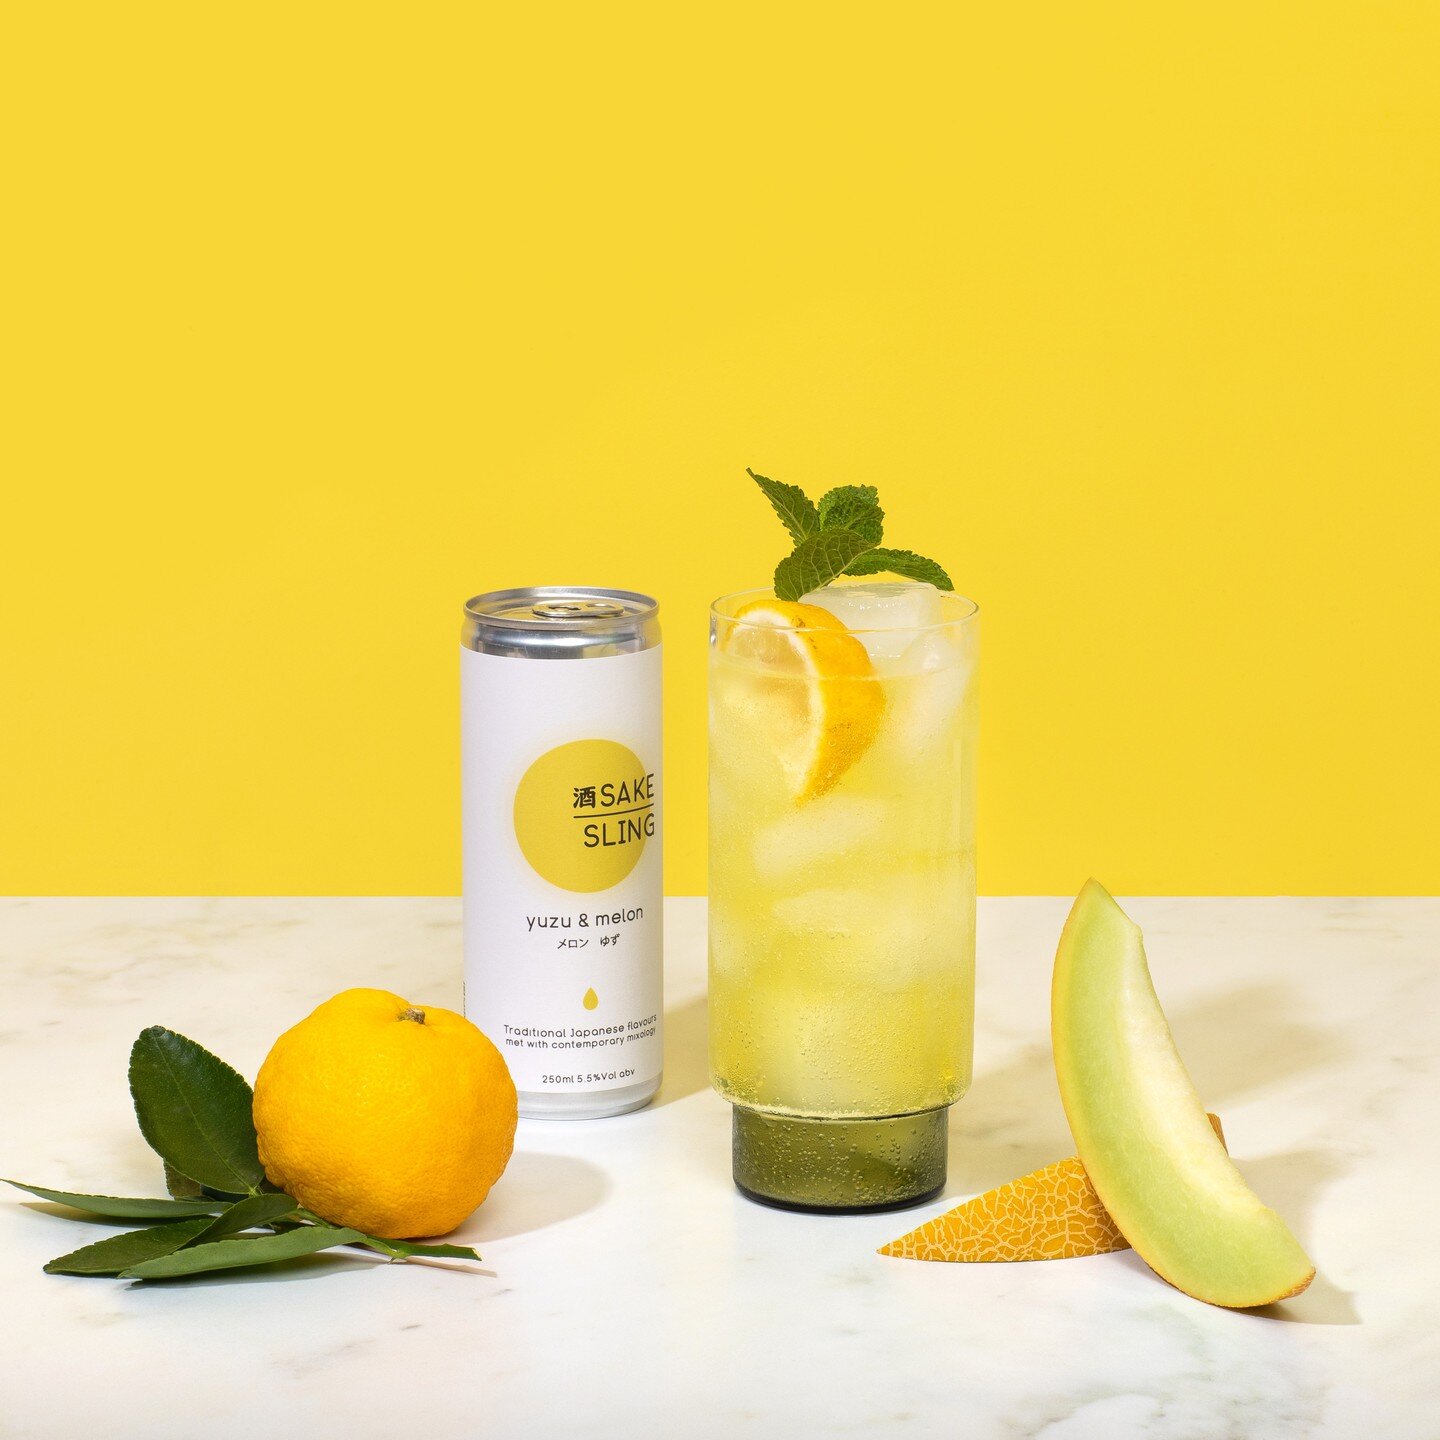 @cutlasscomms will next week launch @sake_sling to the UK media.

The founders of RTD cocktail have announced the product&rsquo;s launch in the UK in a pair of innovative and delicious flavours. The drink is the brainchild of the renowned sake produc